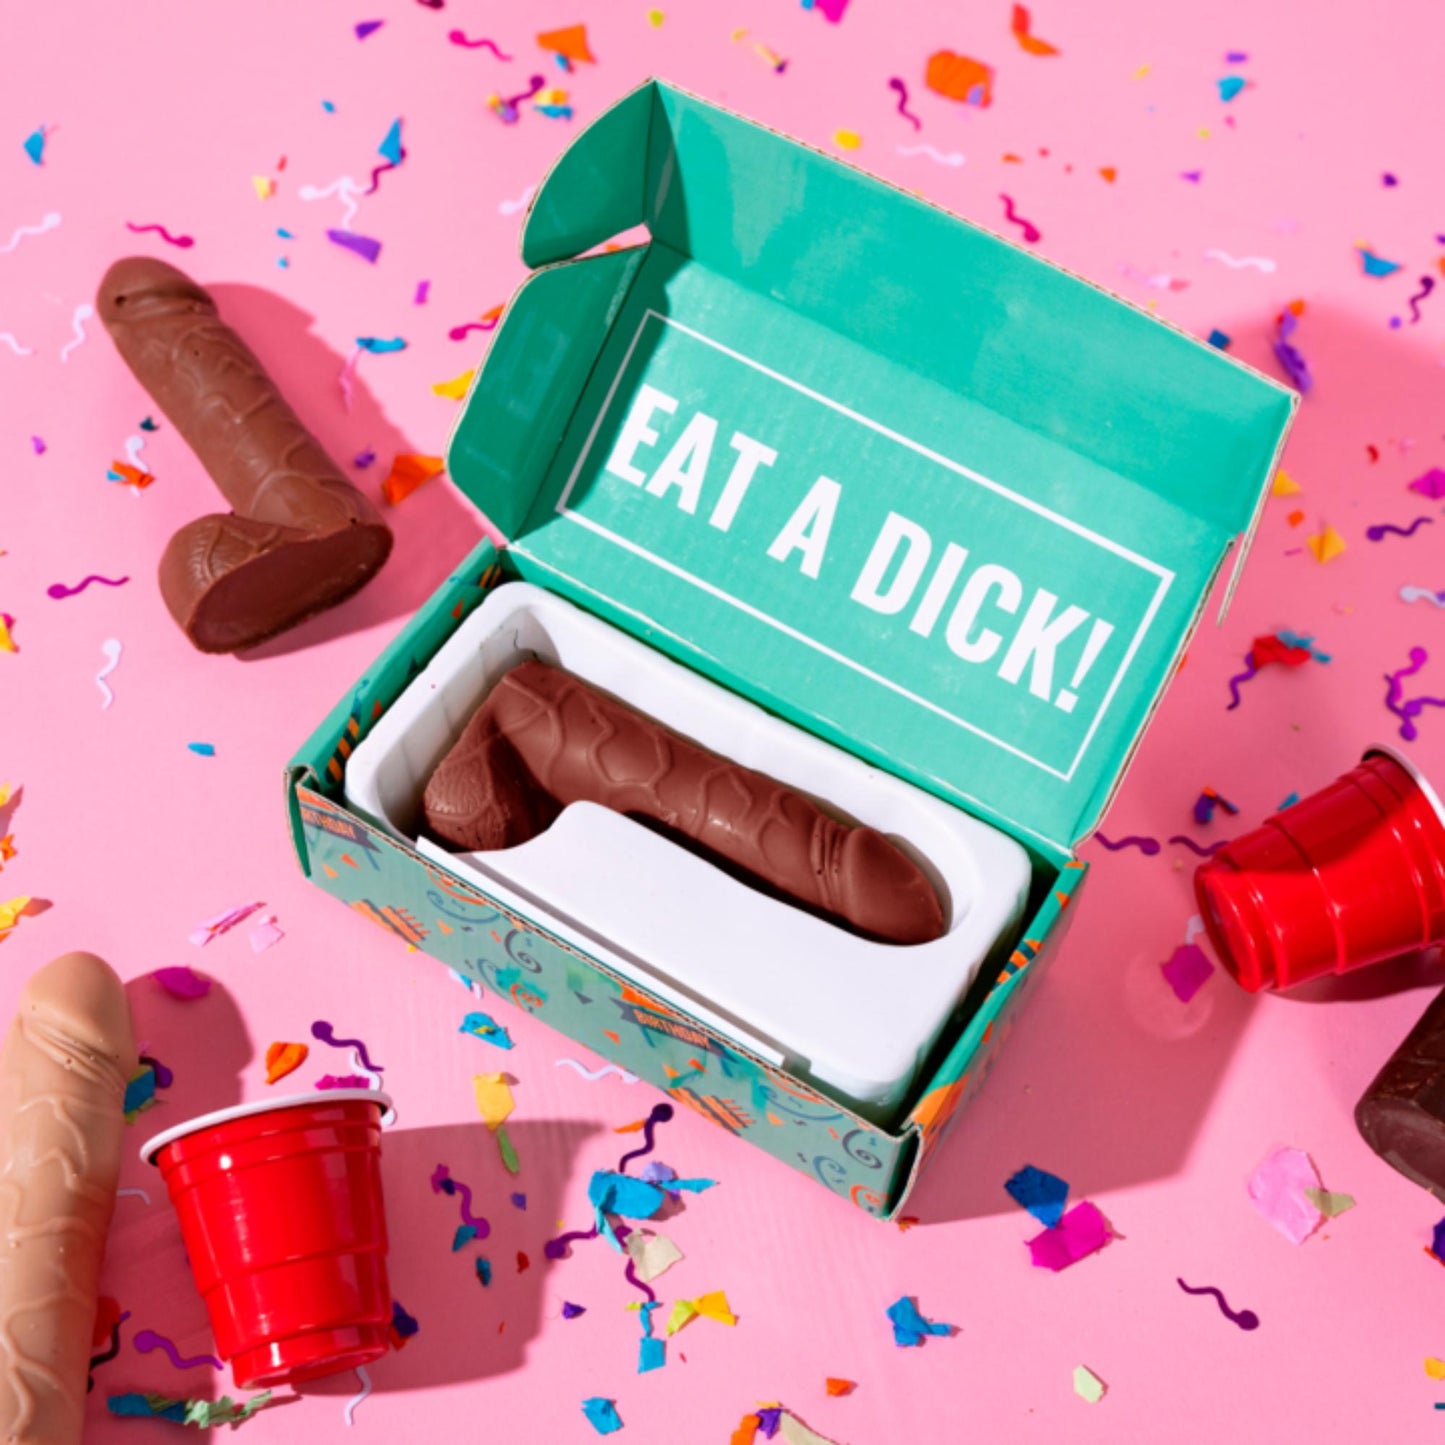 Eat a Dick - Dick in a Box Chocolate